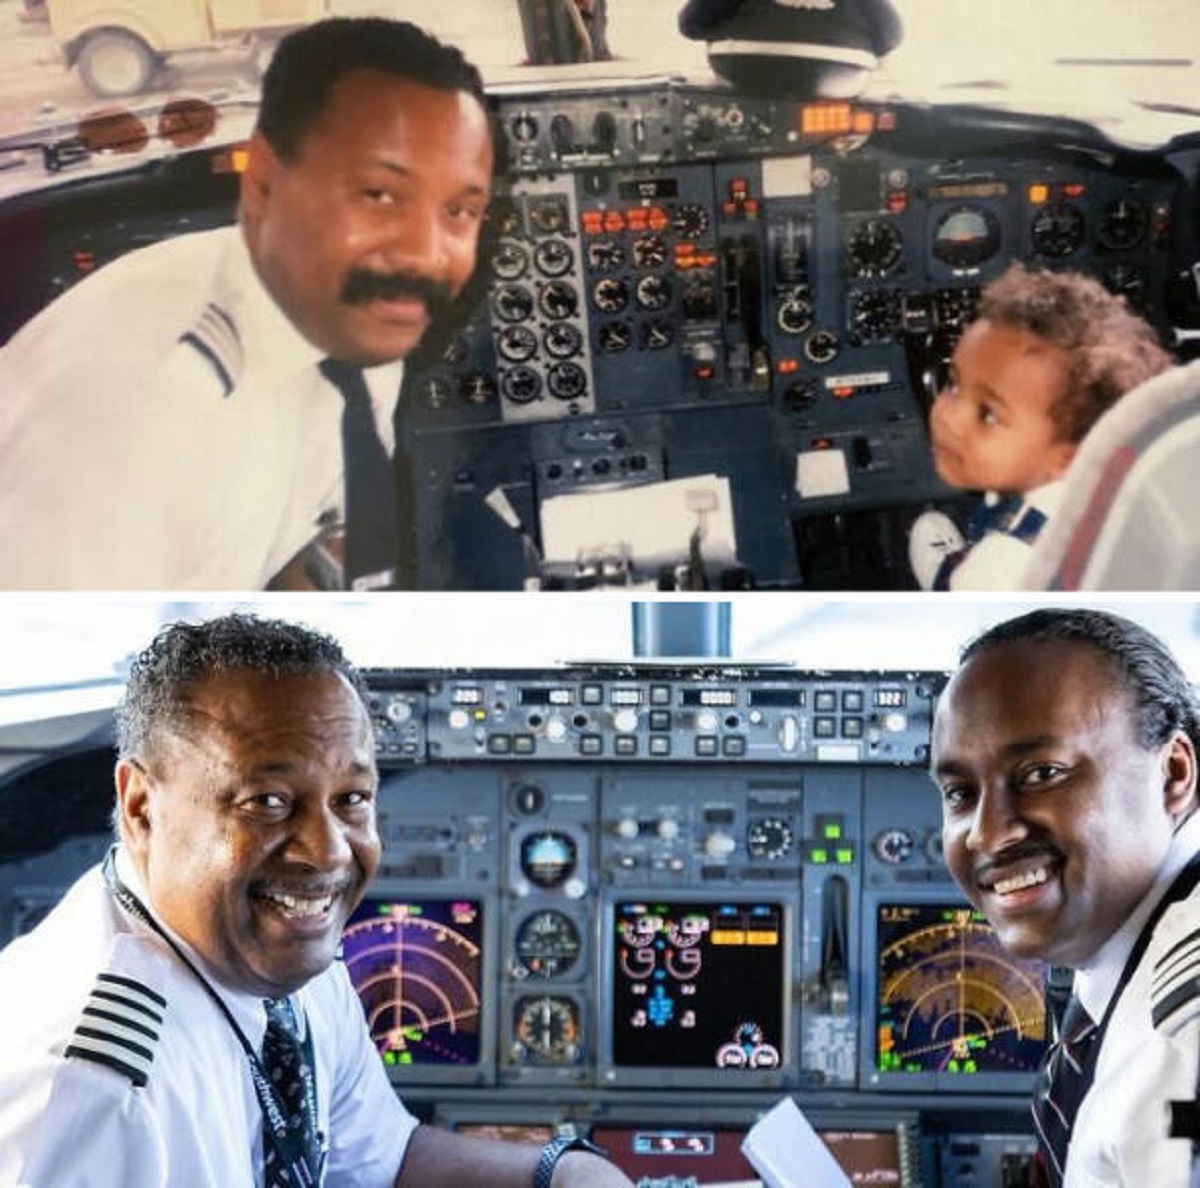 "A Kid Posed With His Pilot Dad In An Airplane. Almost 30 Years Later They Recreated The Photo"

"Meet Captain Ruben and his son, First Officer Ruben. Captain Ruben flew with Southwest for nearly 31 years and inspired his family to pursue their dreams of flying too. Not only did his son spend his whole life working to become a Pilot, but his brother and cousin are now Southwest Pilots too! Captain Ruben shared many flights with his family before retirement, including his last flight from Omaha, Neb., to Chicago (Midway) with his son serving in the right-hand seat as his First Officer. Congrats, Captain Ruben, on your well-earned retirement."